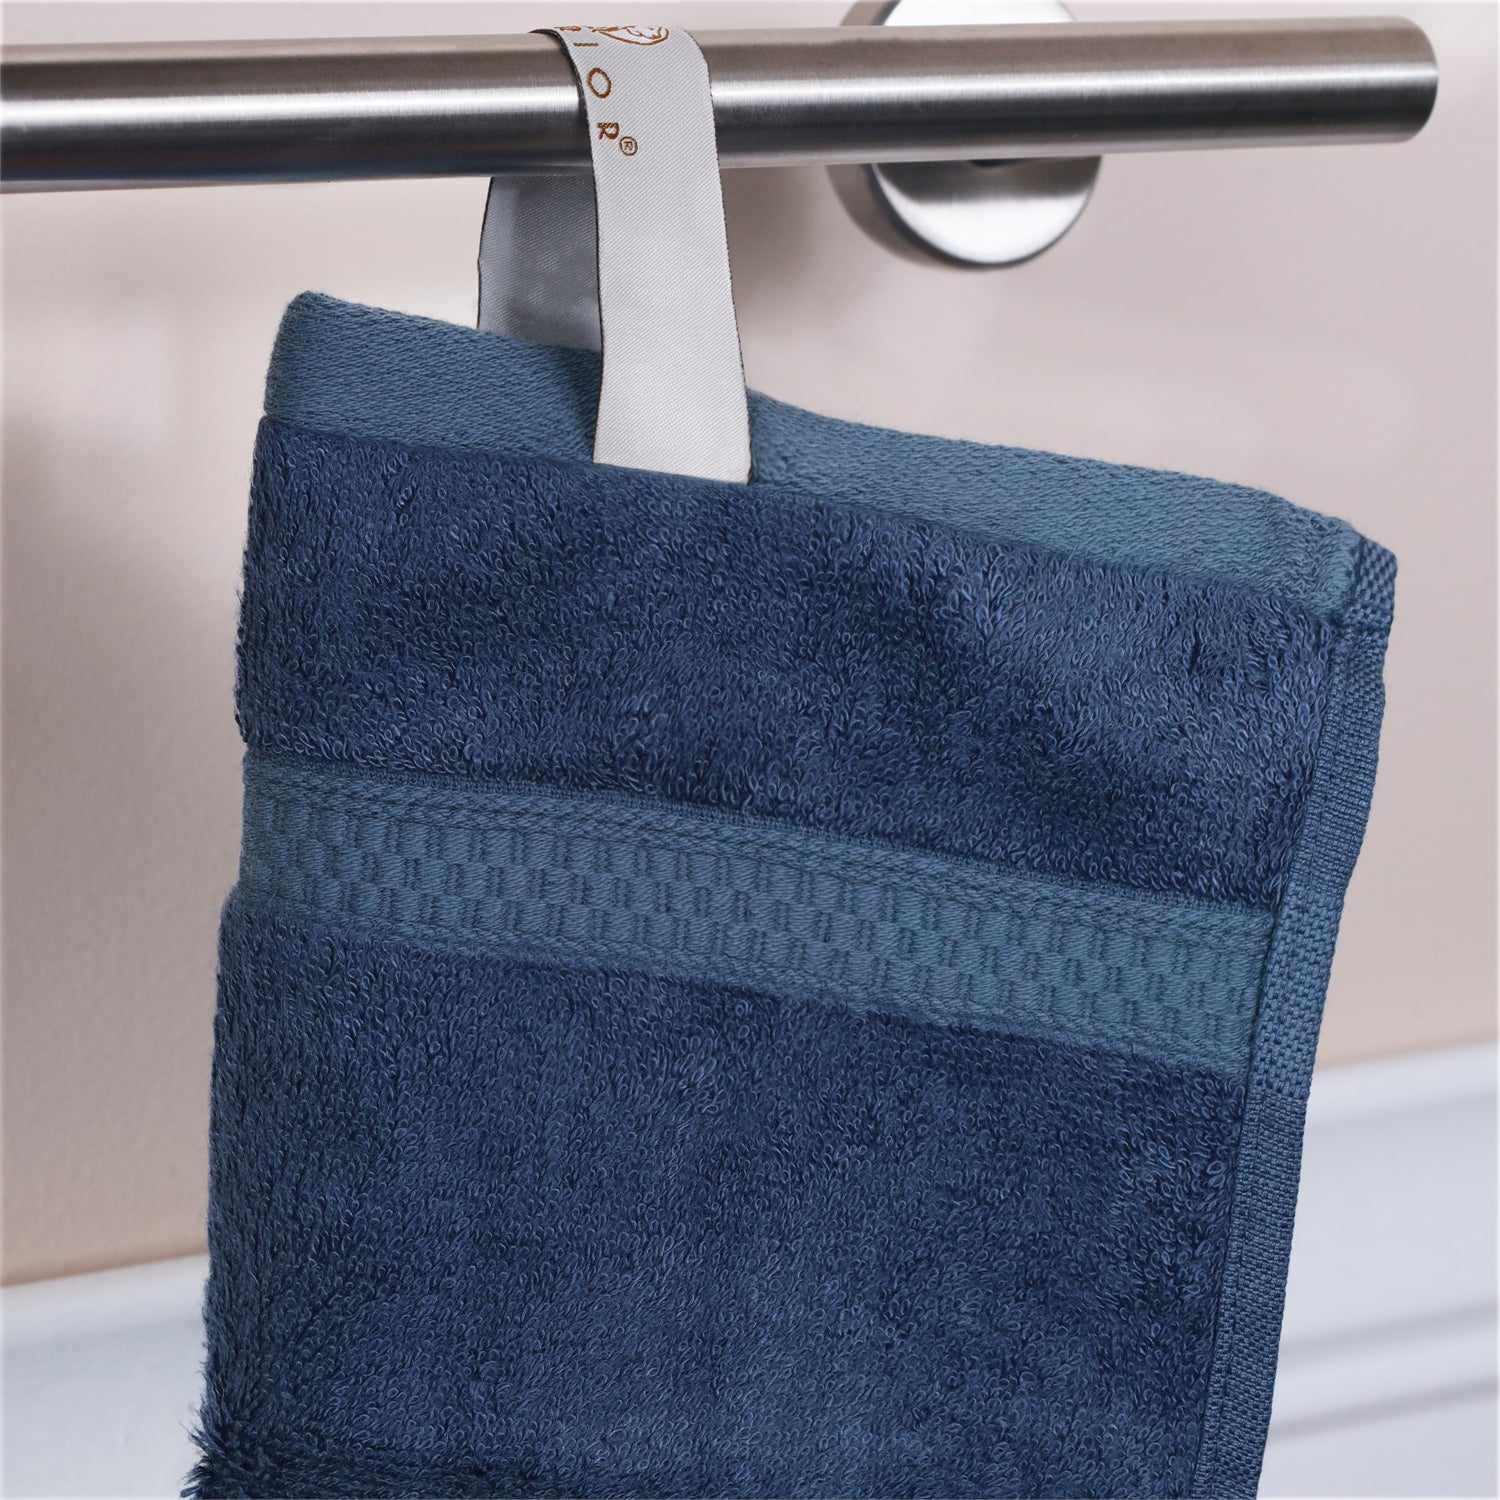  Ultra-Soft Hypoallergenic Rayon from Bamboo Cotton Blend Bath and Face Towel Set -  Royal Blue